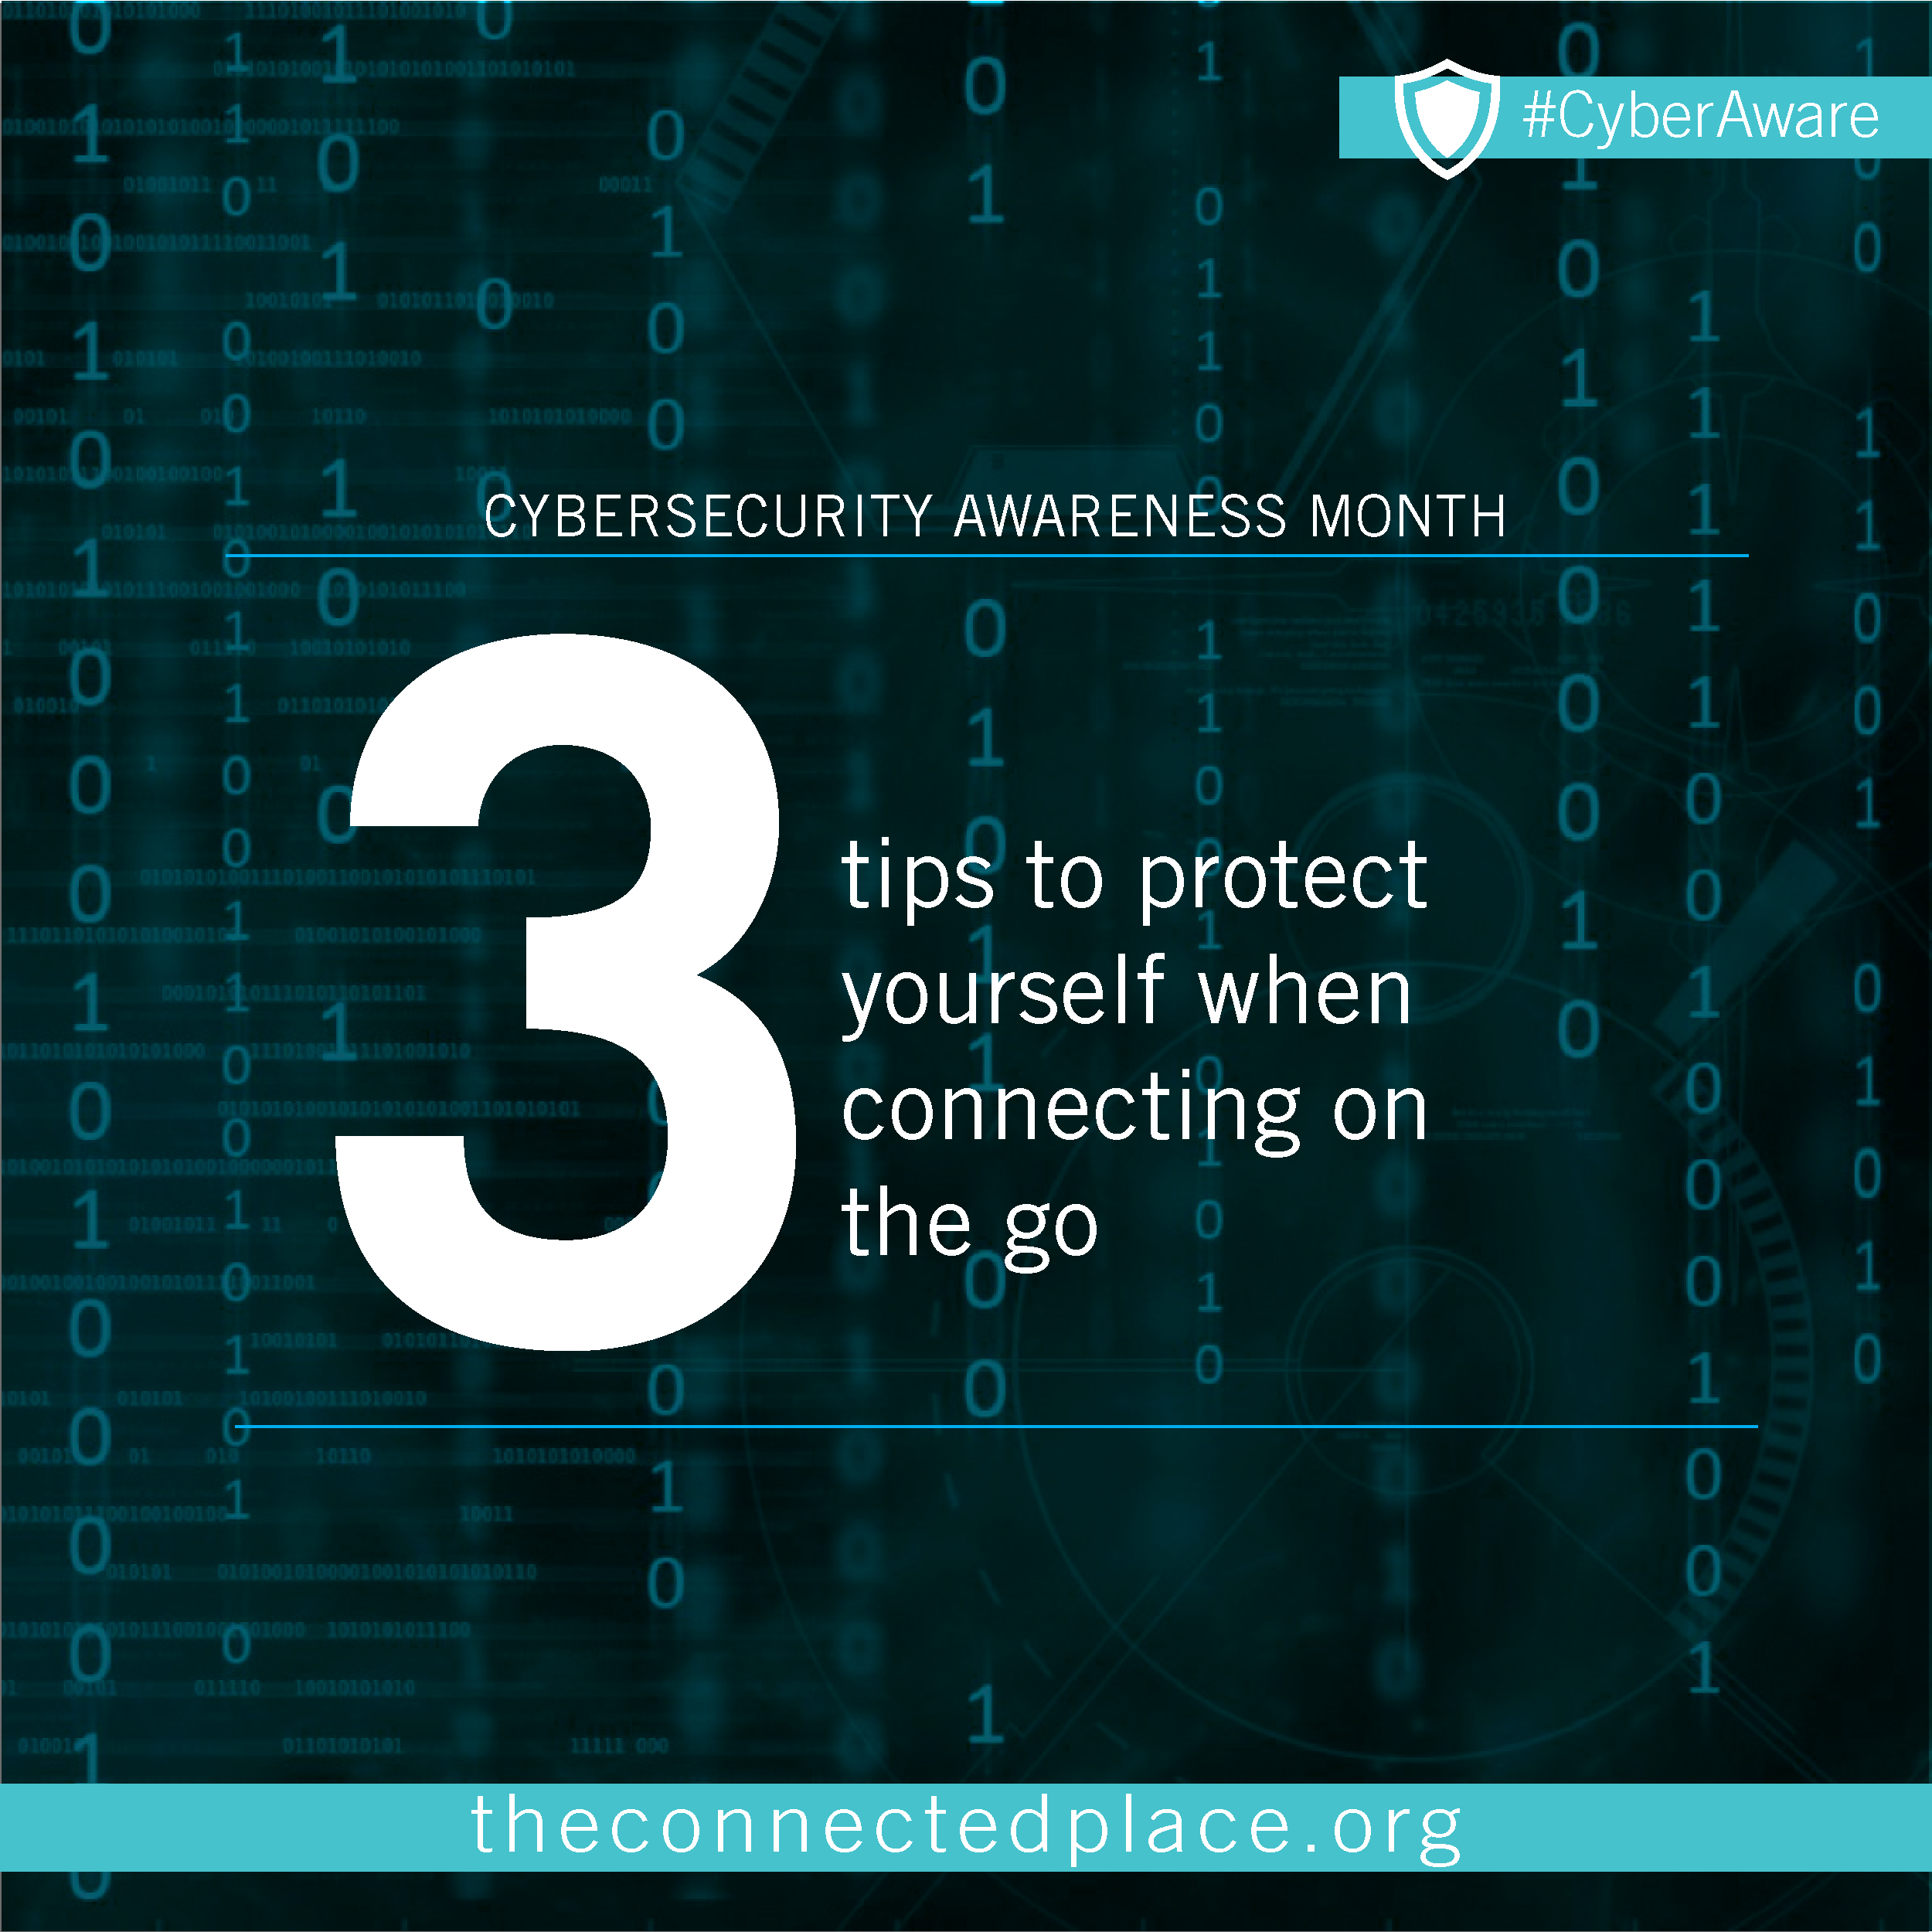 3 cybersecurity tips to protect yourself when connecting on the go